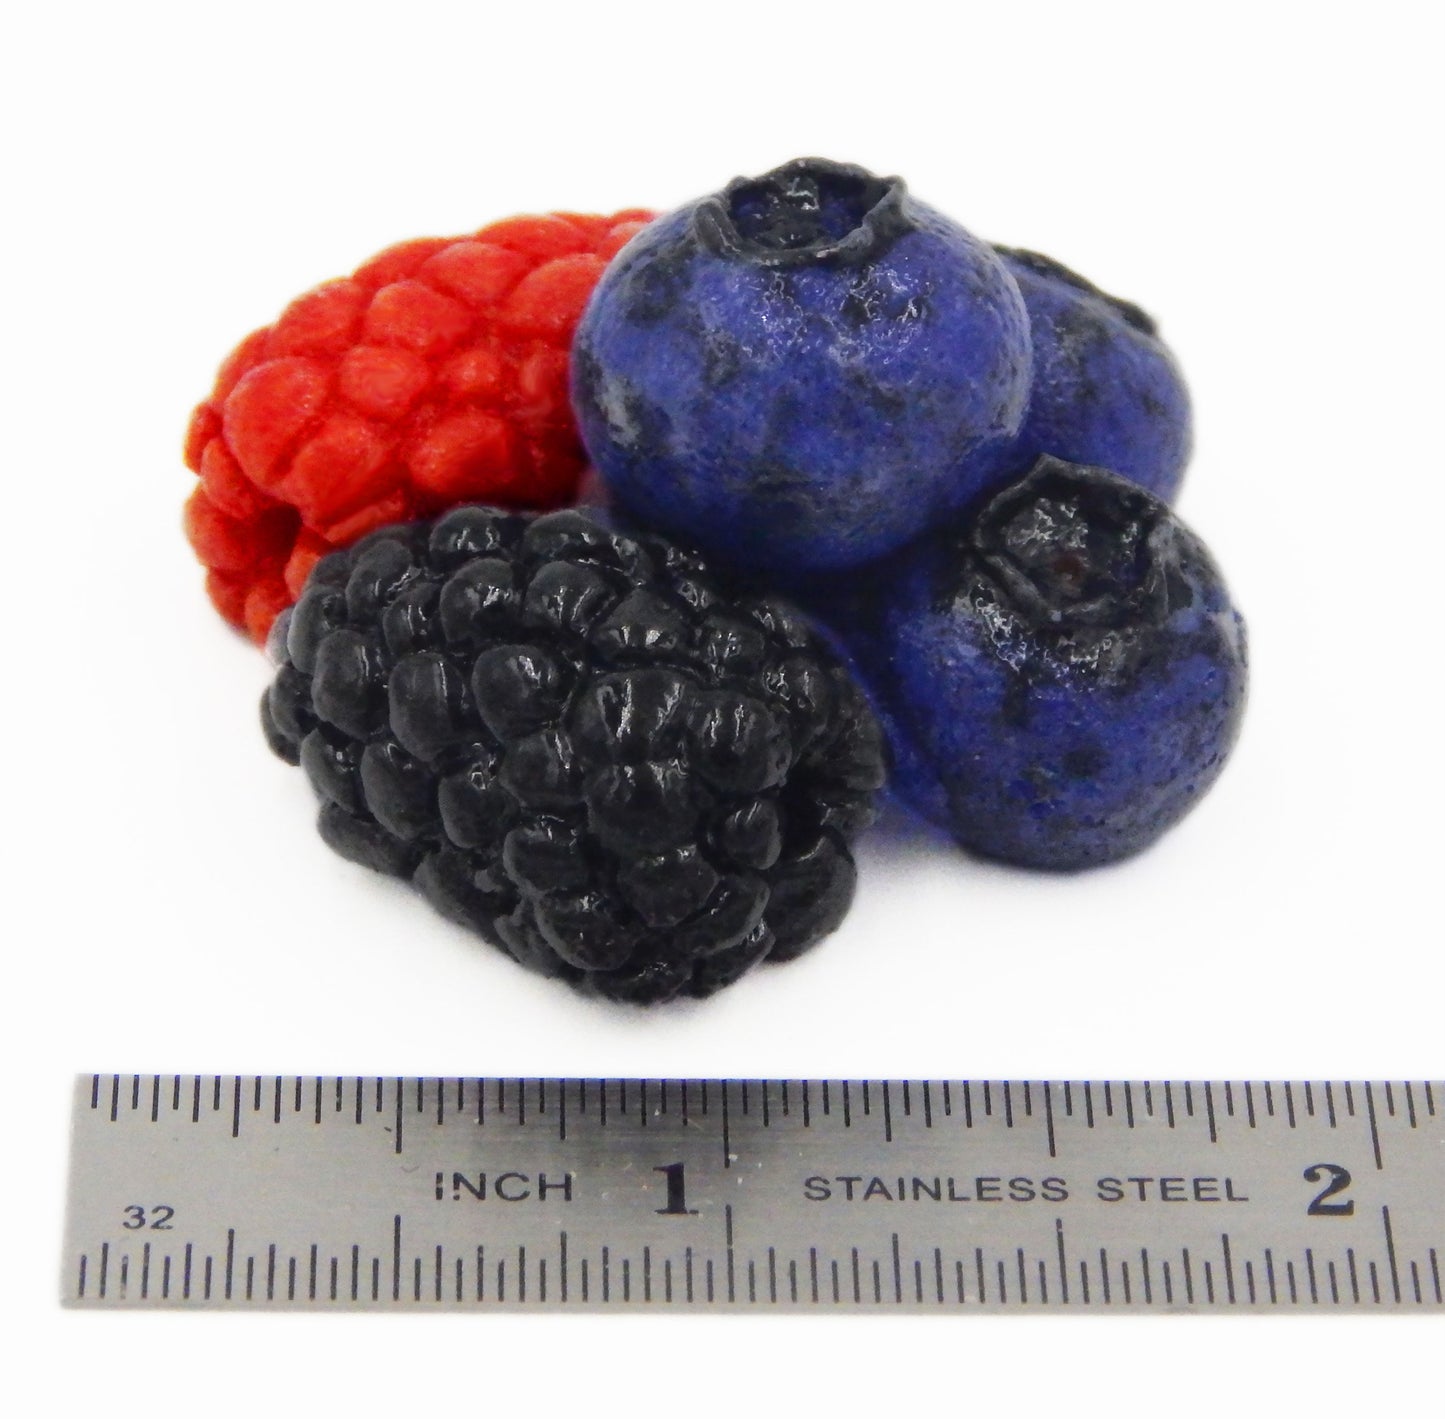 Mixed 3 Berry Cluster (MP14-161)